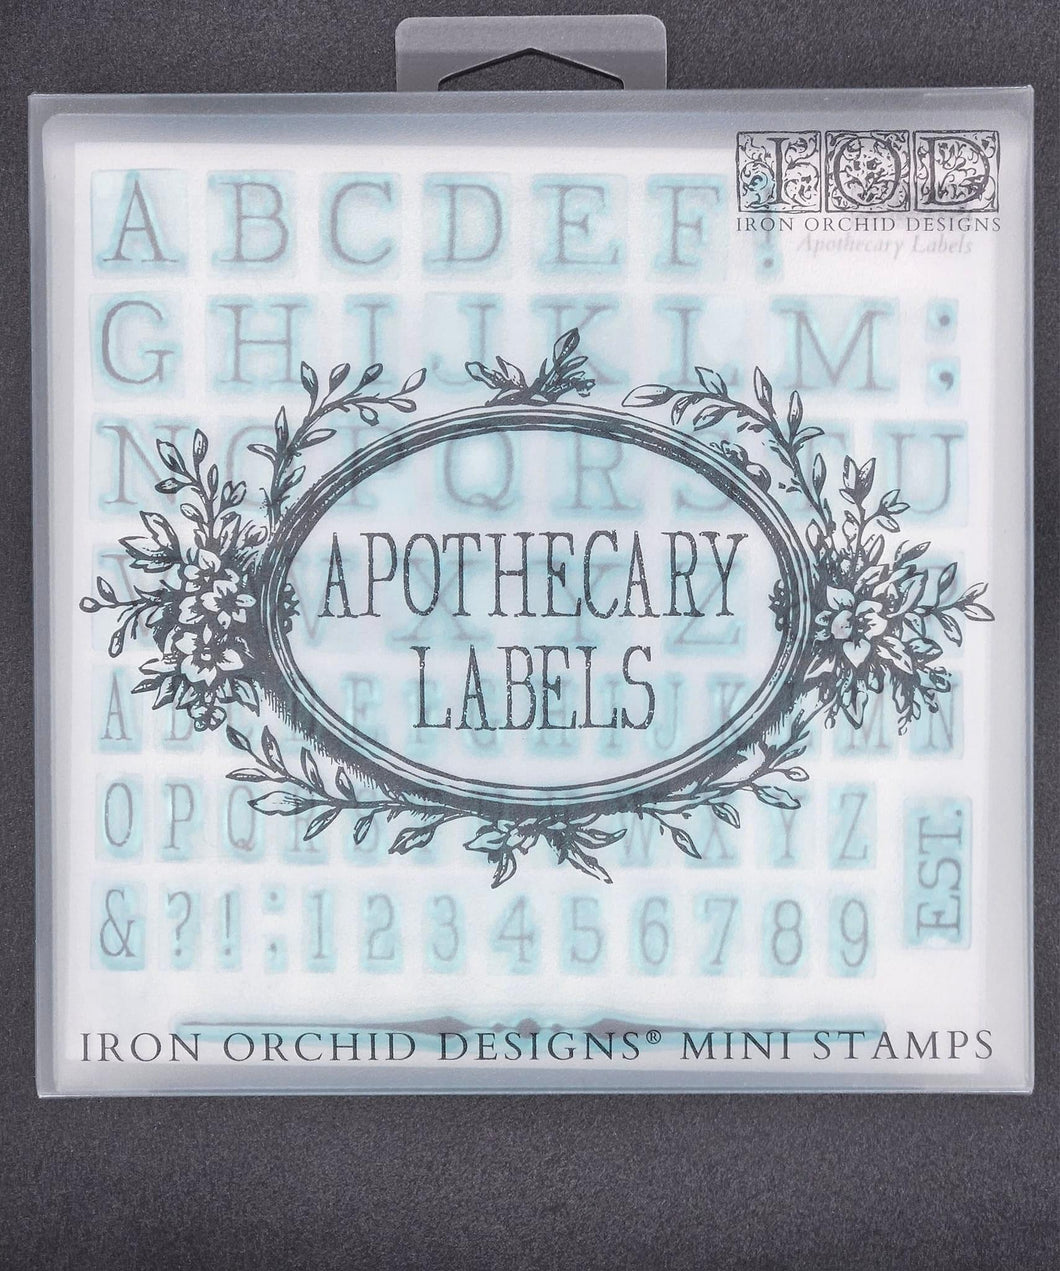 Iron Orchid Designs Apothecary Labels 6